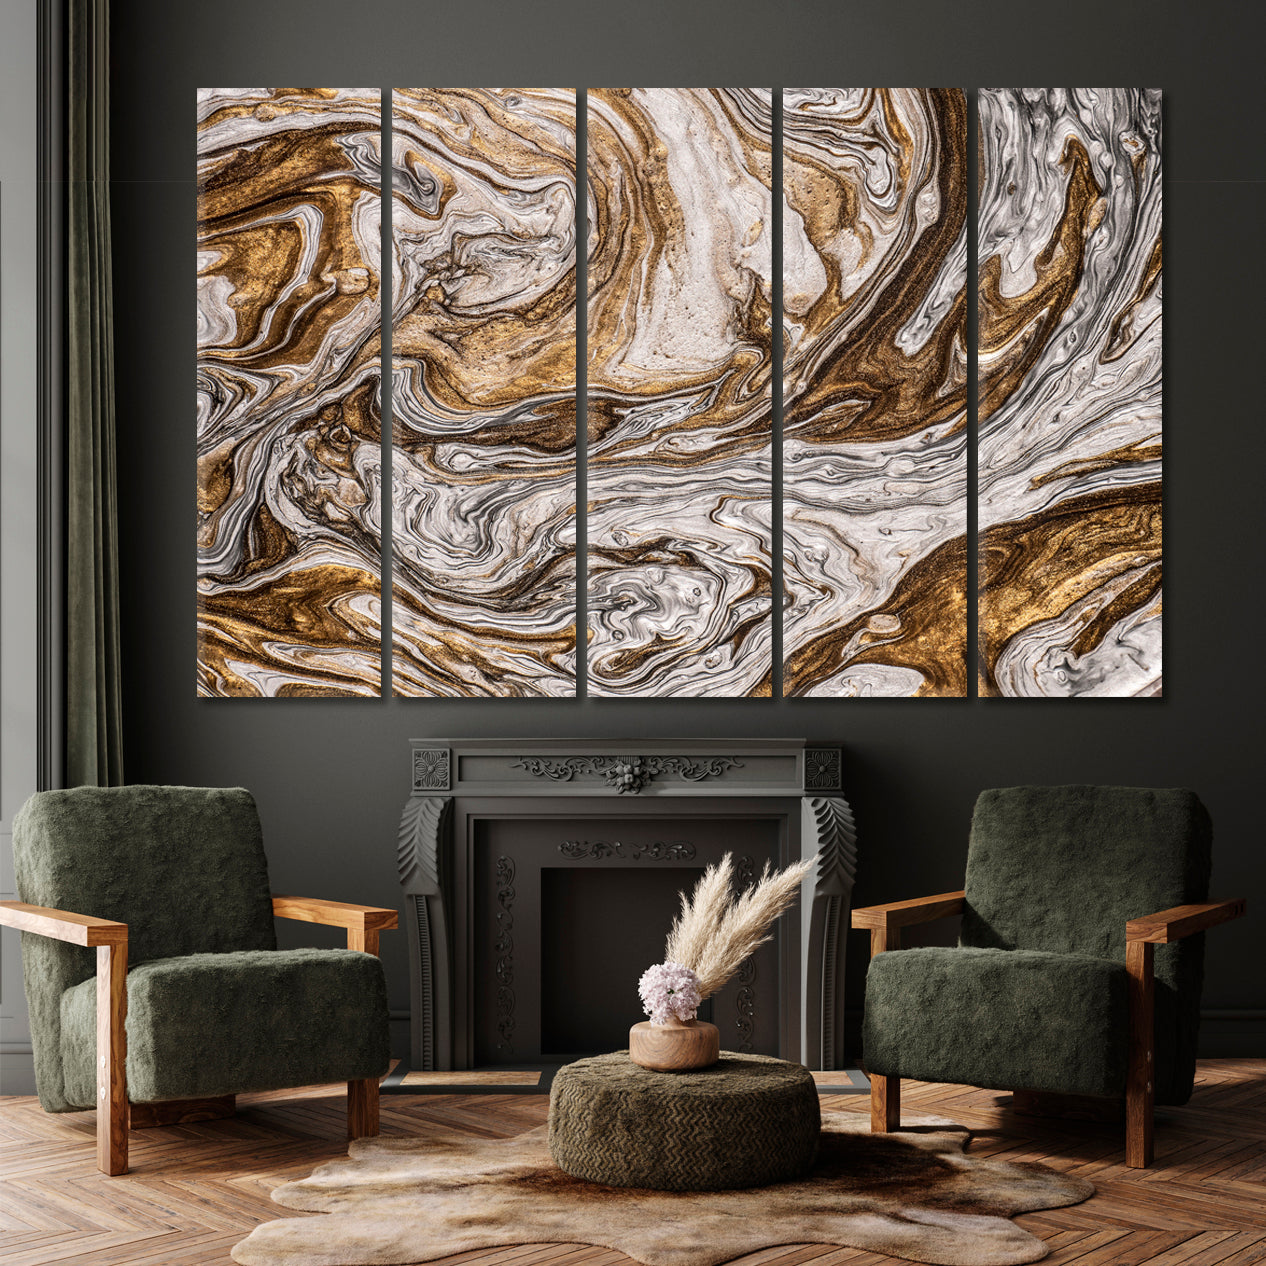 BROWN GREY Effect of Gold and Silver Powder Abstract Marble Oriental Fluid Art Canvas Print Fluid Art, Oriental Marbling Canvas Print Artesty 5 panels 36" x 24" 